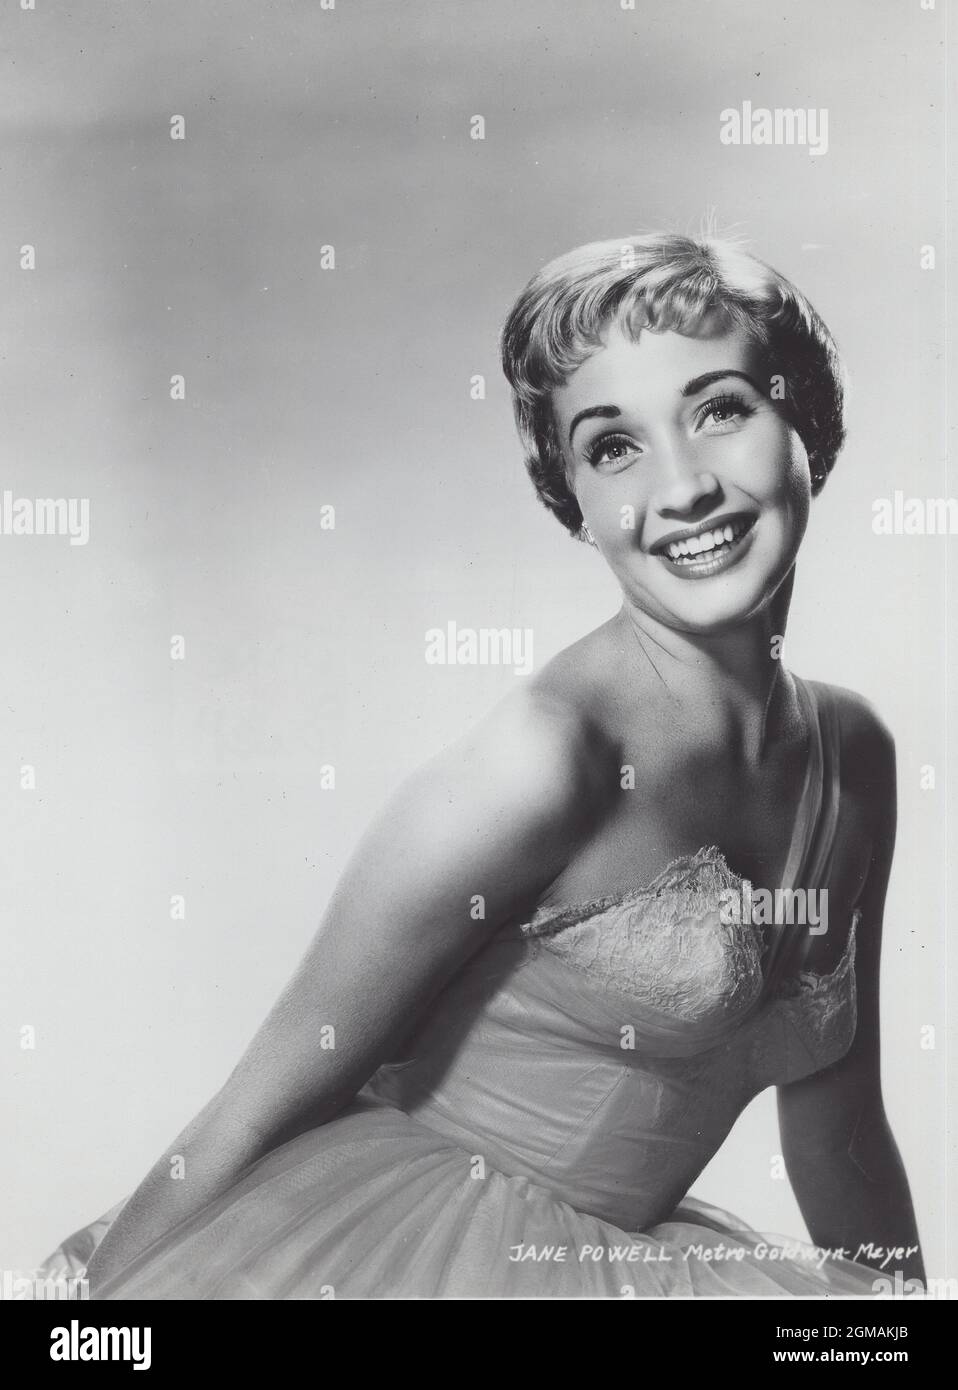 September 17, 2021: Actress JANE POWELL, the star of some of Hollywood's best-loved Golden Age musicals, has died at the age of 92. Powell died Thursday at her home in Wilton, Connecticut, her friend Susan Granger told CNN on Friday. A megastar of musical films of the 1940s and '50s, Powell's hits included 'Seven Brides for Seven Brothers' opposite Howard Keel, and 'Royal Wedding,' in which she starred alongside F. Astaire. pictured circa 1950's.  (Credit Image: © Smp/ZUMA Wire) Stock Photo